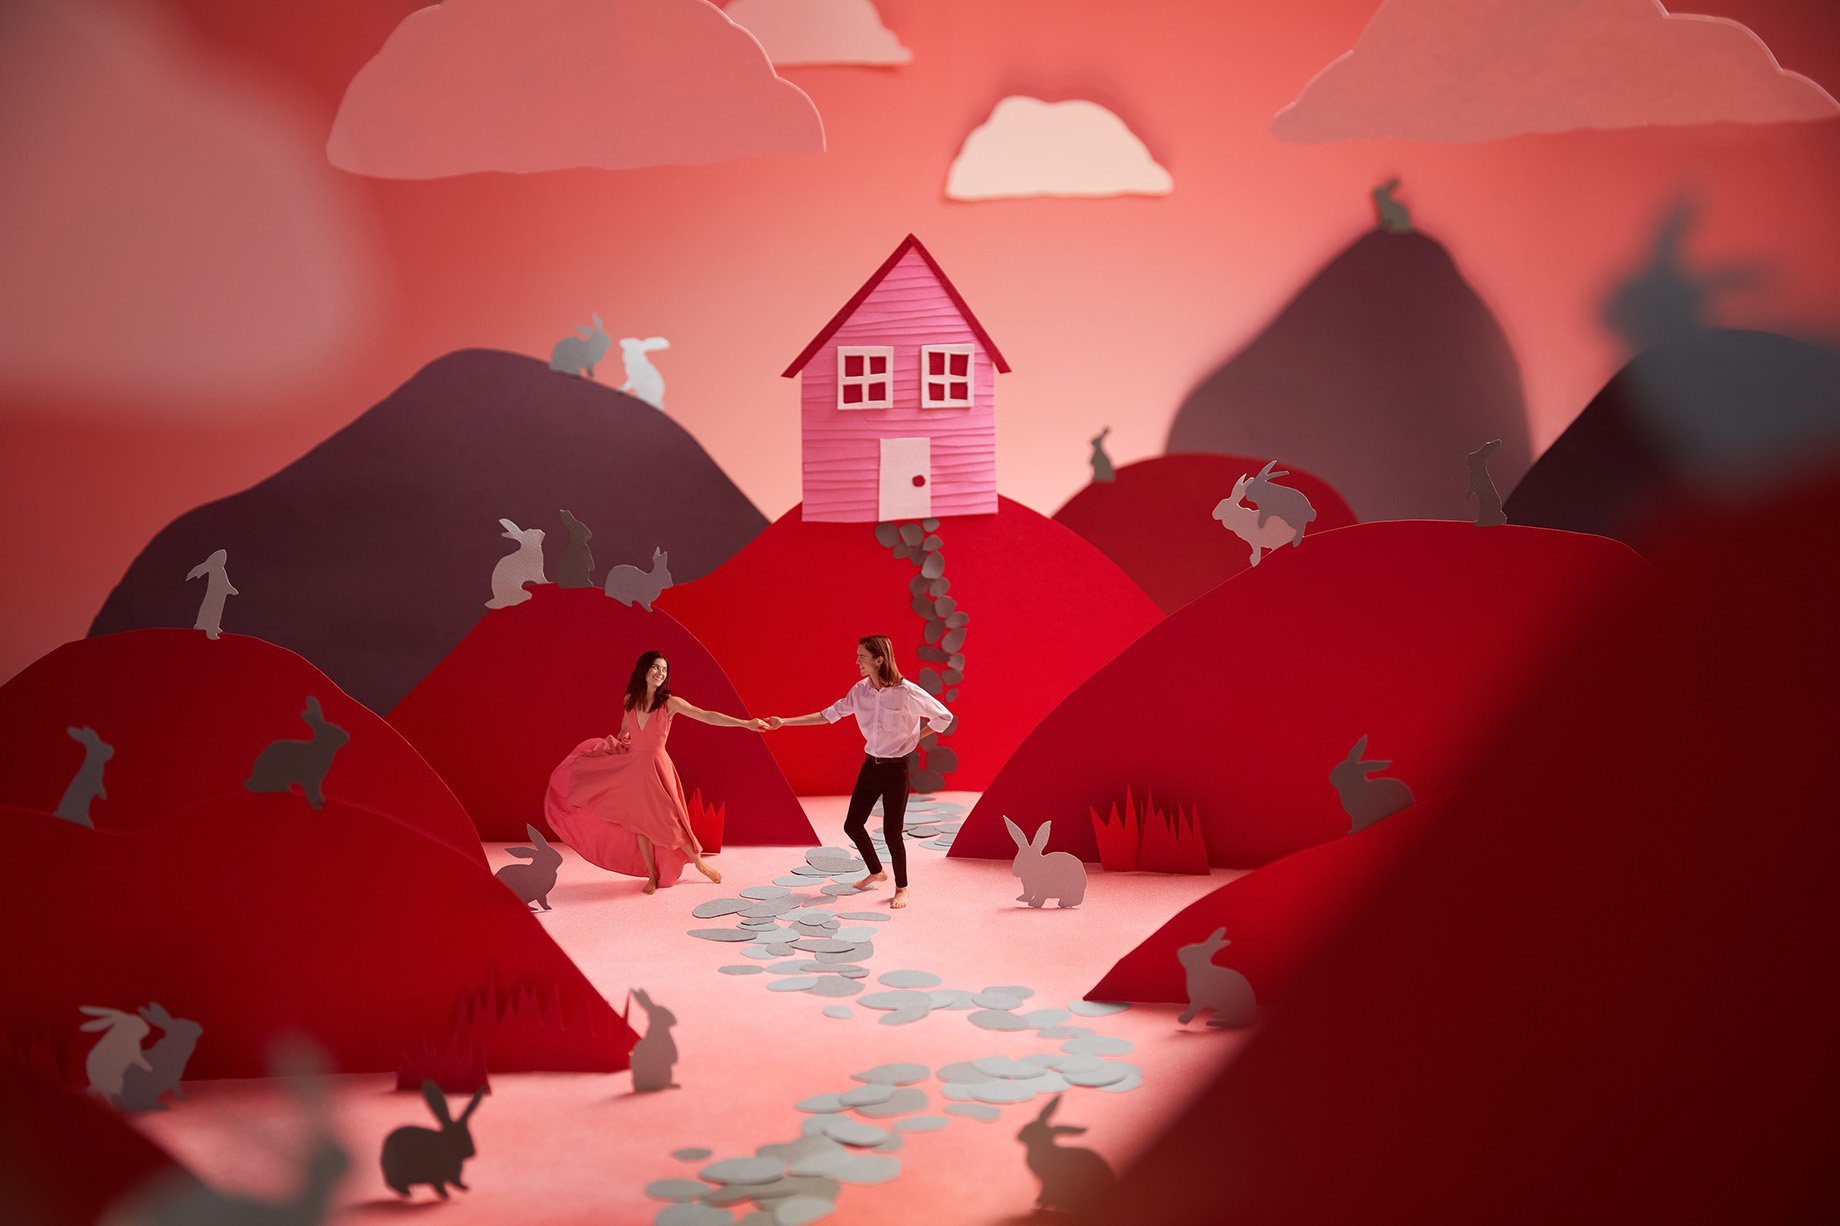 Man and woman dance amid red hills and bunnies made from construction paper shot by Patrick Heageny for Paper Thin